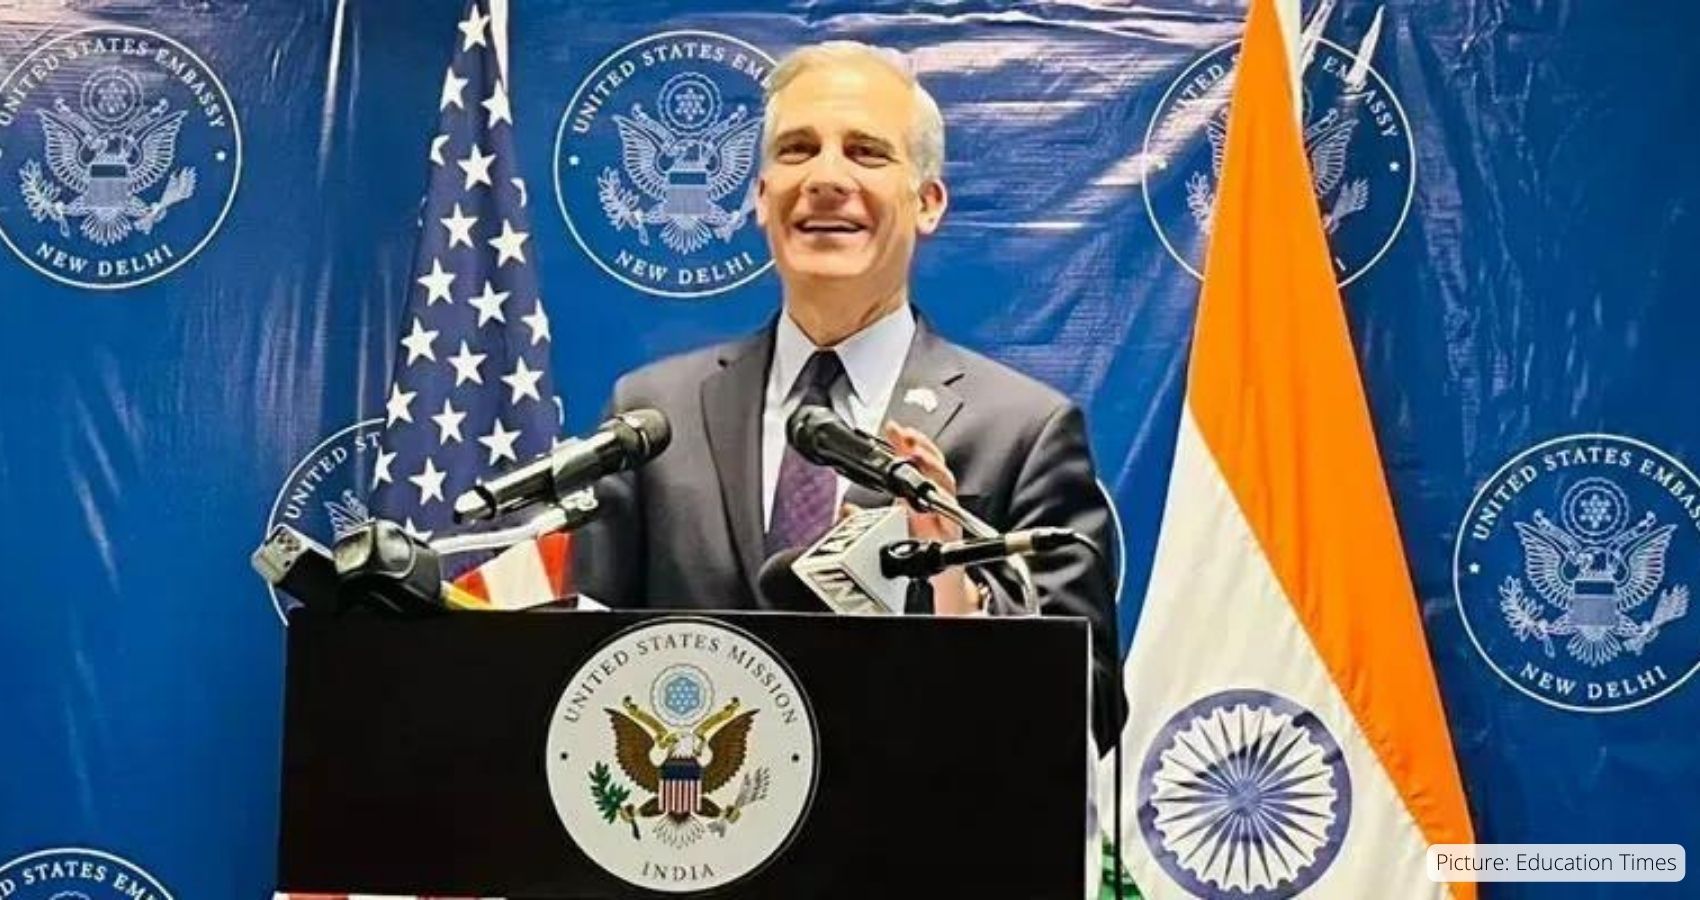 U.S. Will Issue Record Number Of Visas This Year, Says US Ambassador